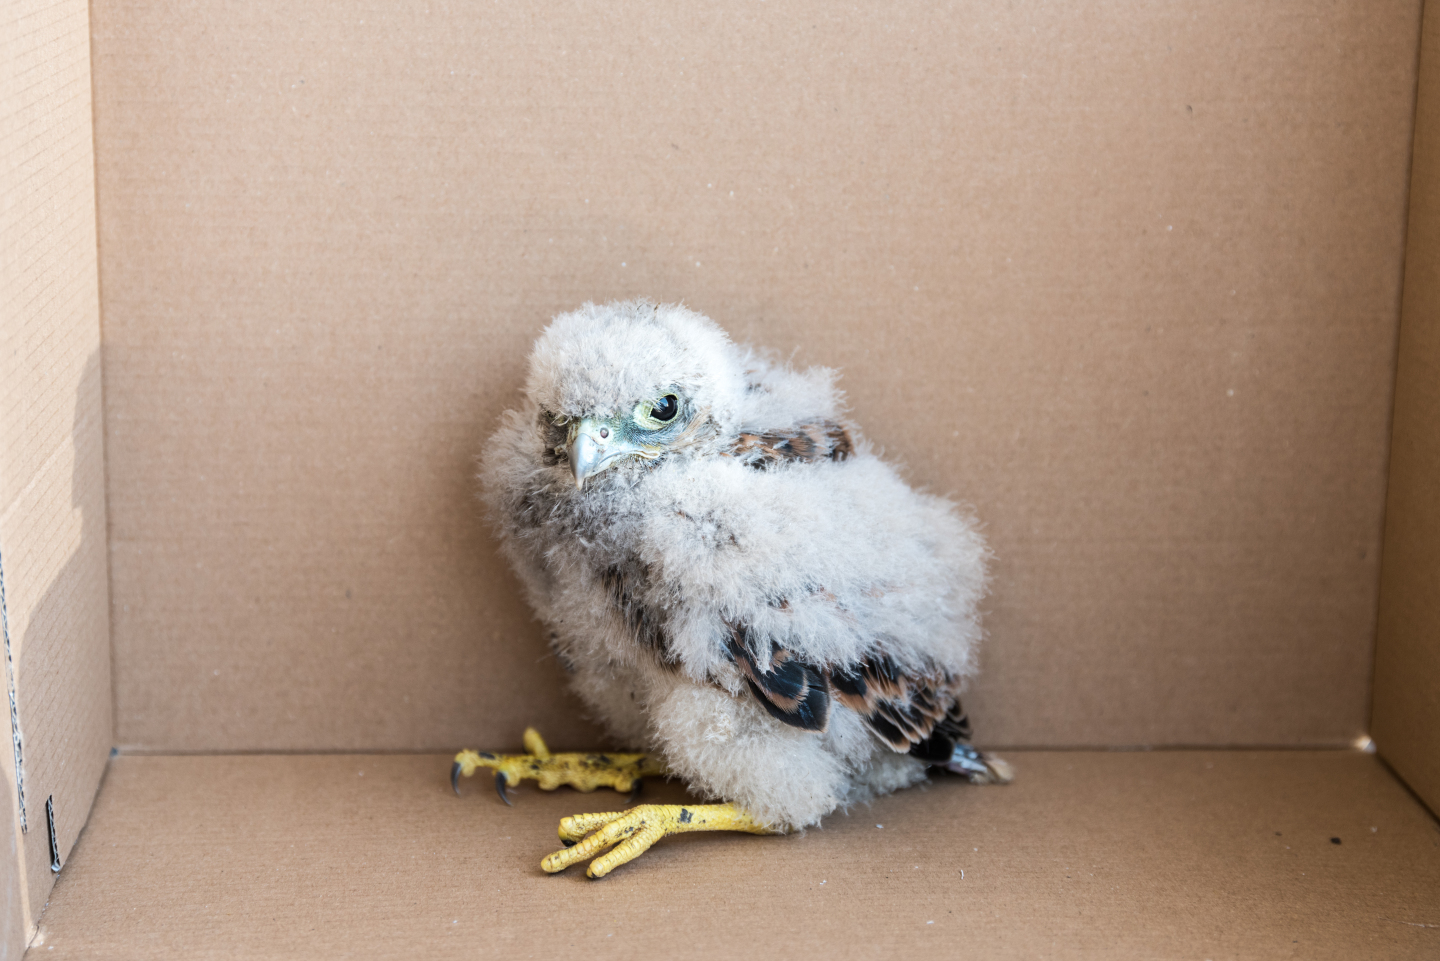 Baby falcon rescued on CERN site